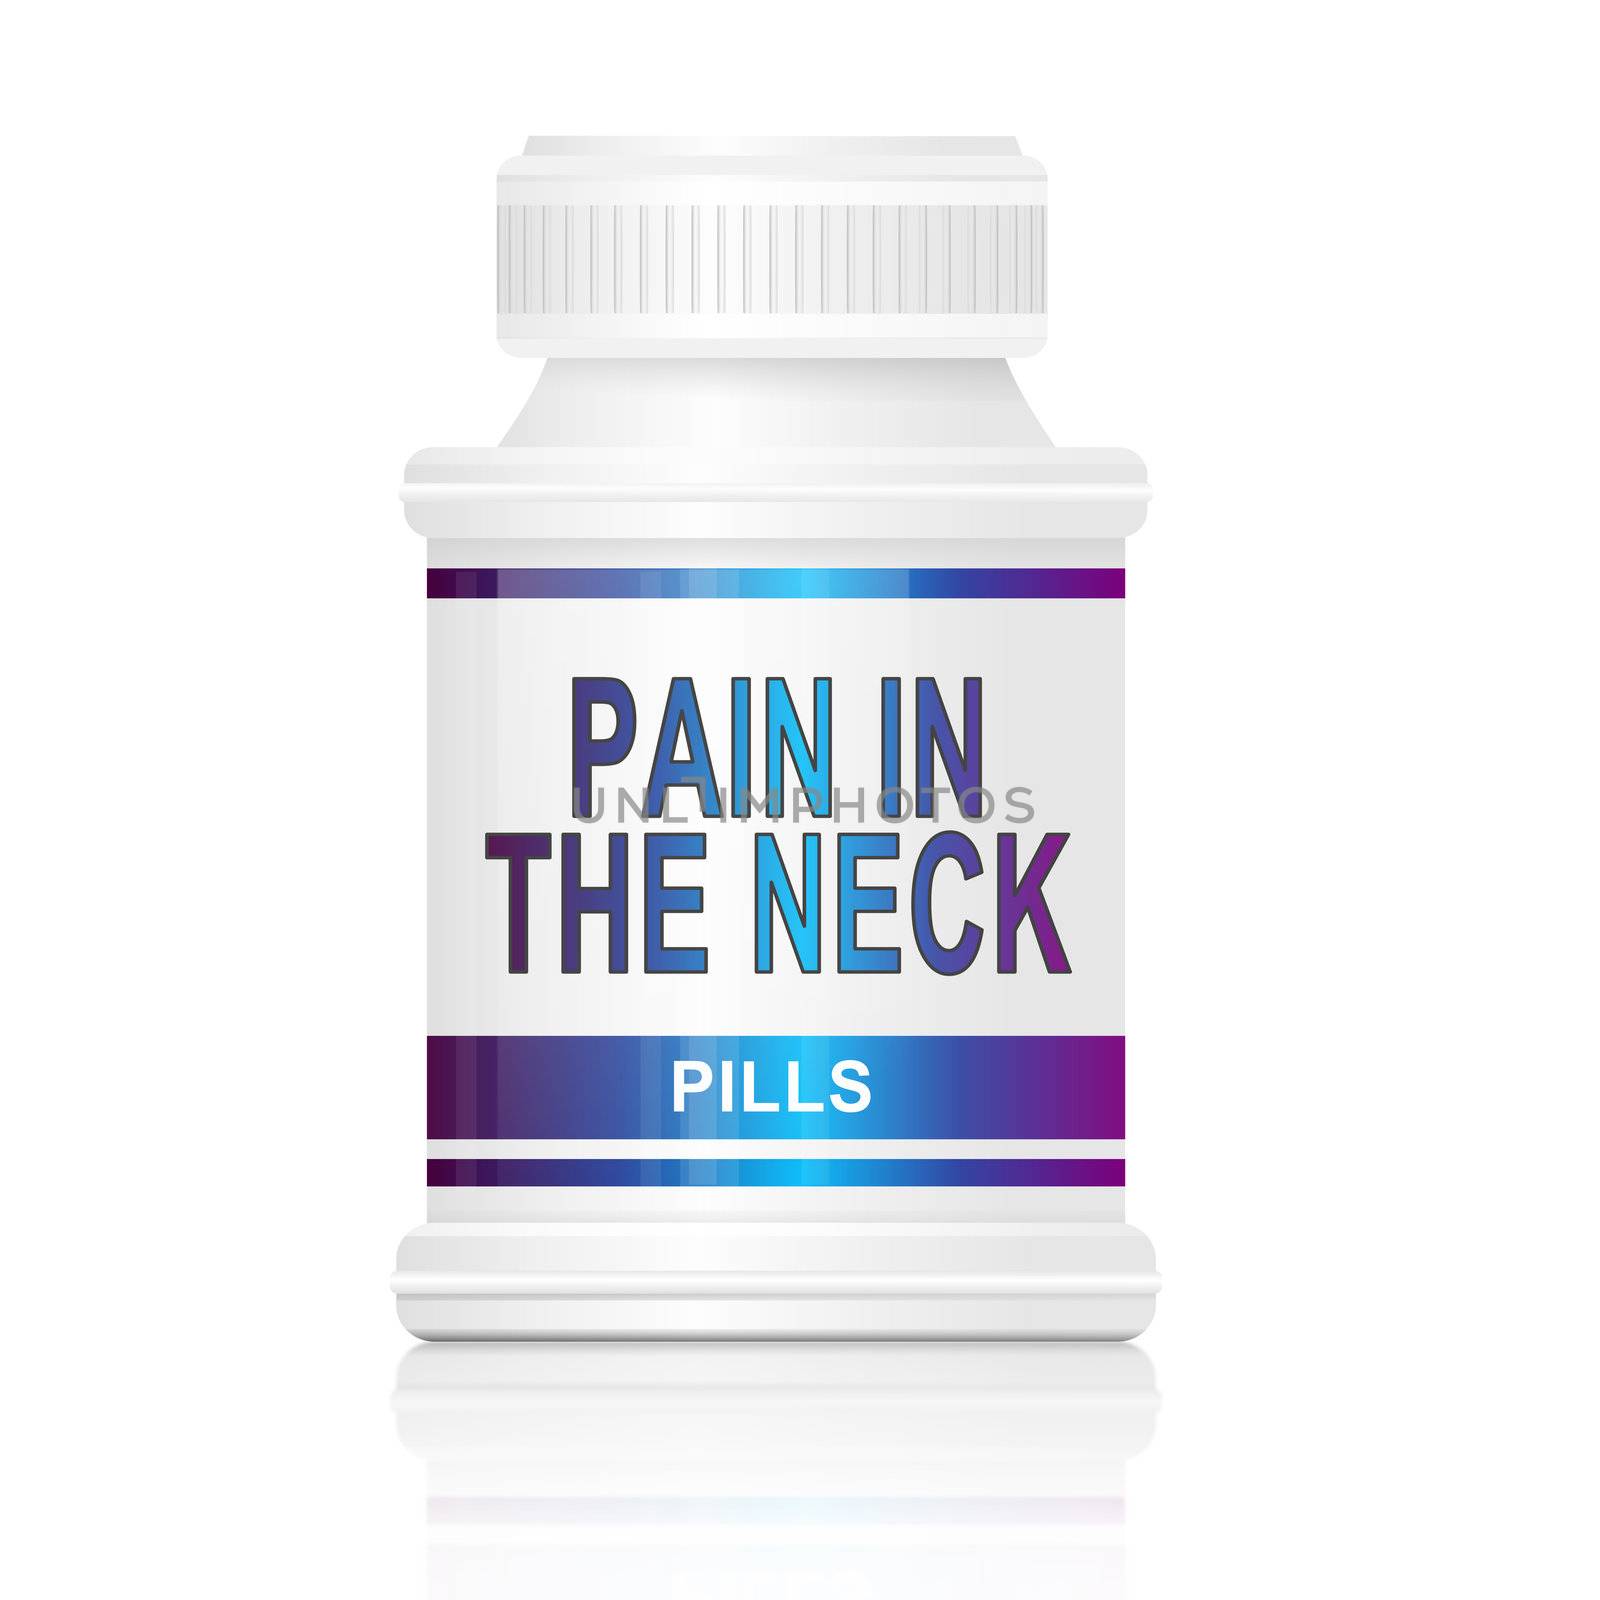 Pain in the neck concept. by 72soul